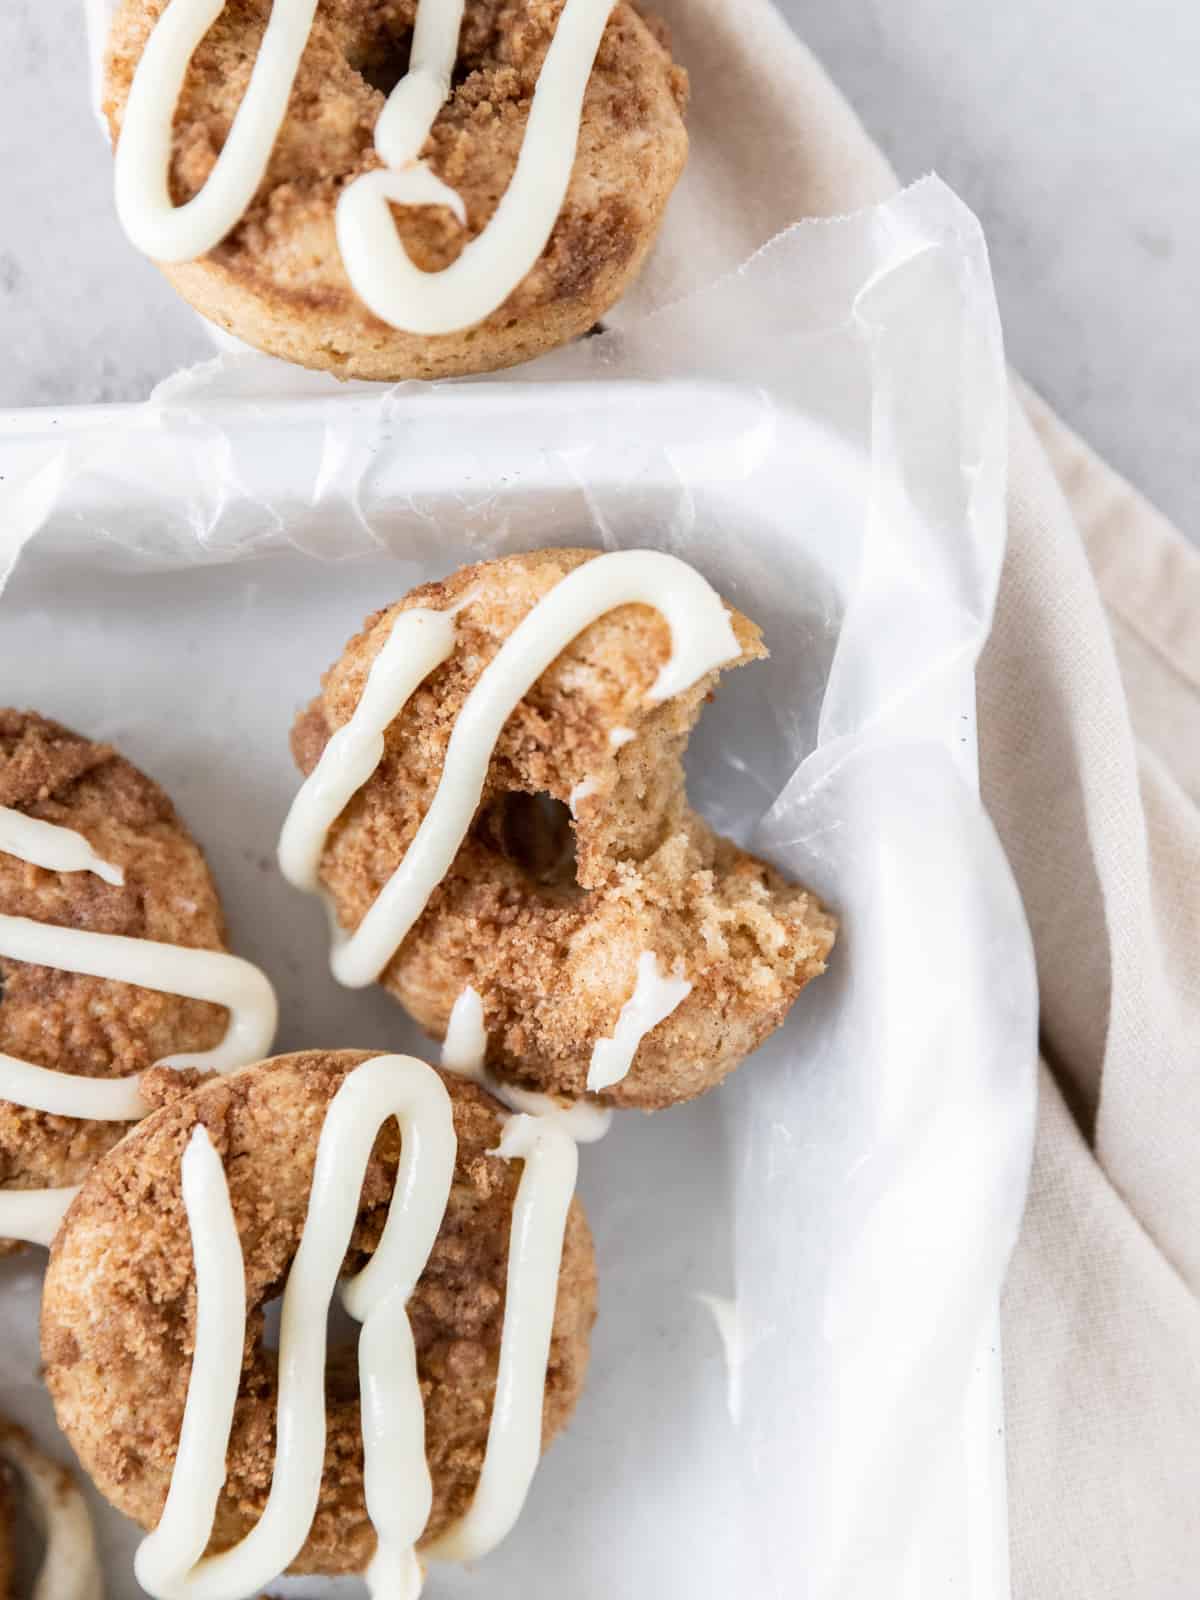 several cinnamon roll donuts in a white pan, one donut has a bite out of it.